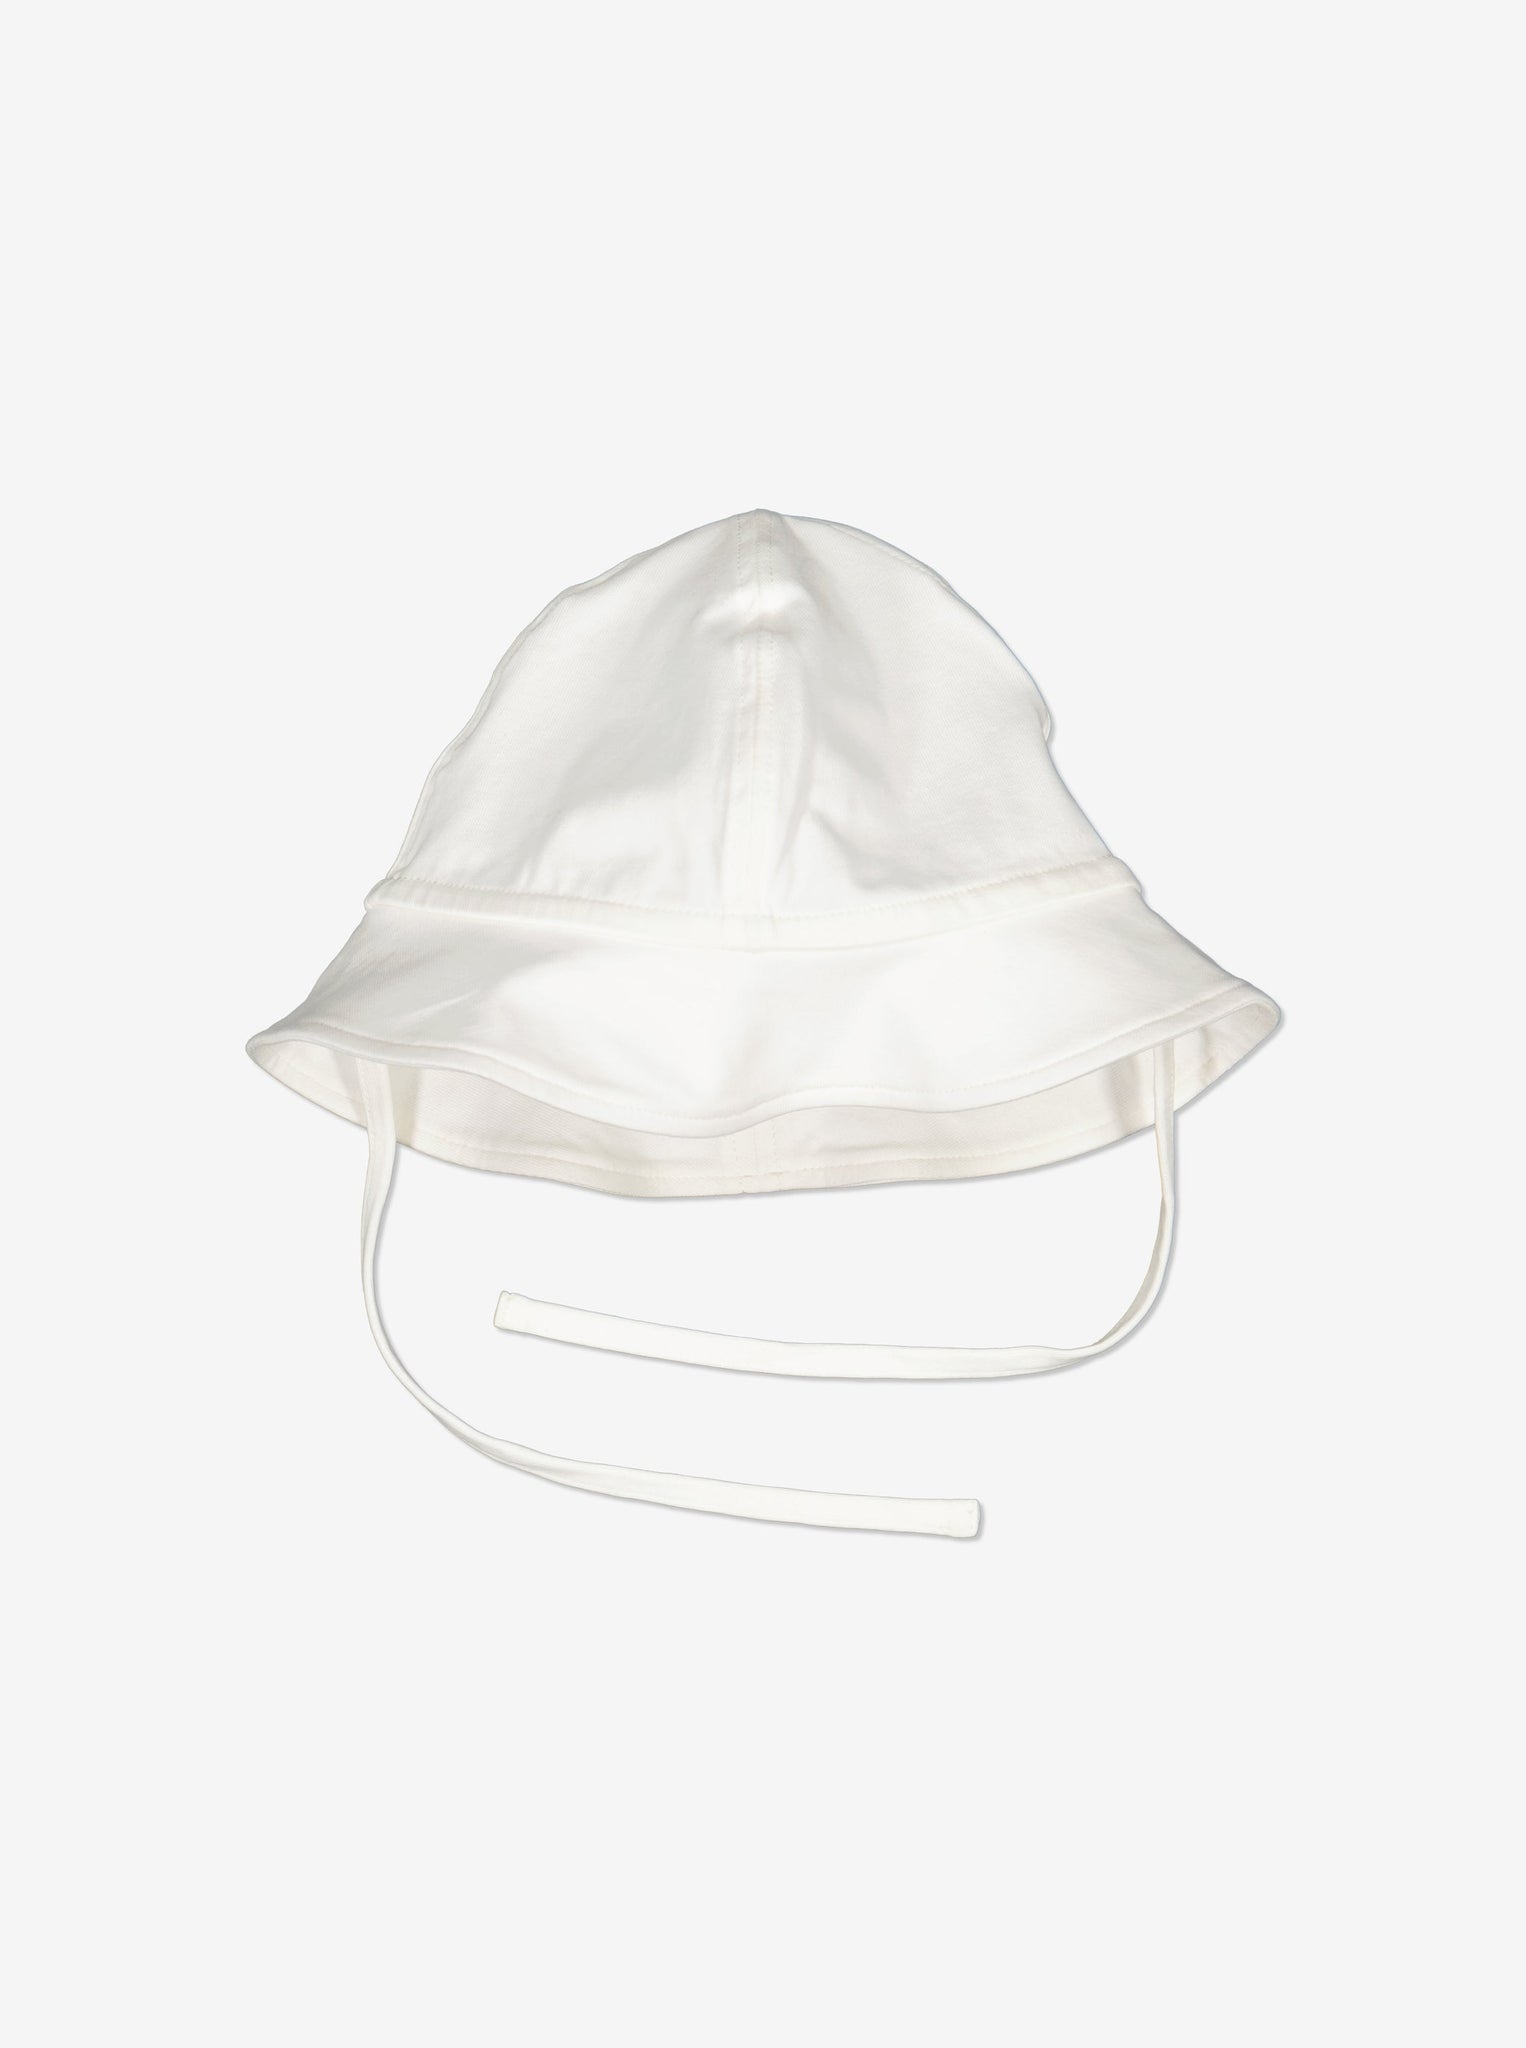 Newborn Baby White Sun Hat from Polarn O. Pyret Kidswear. Ethically made and sustainably sourced materials.